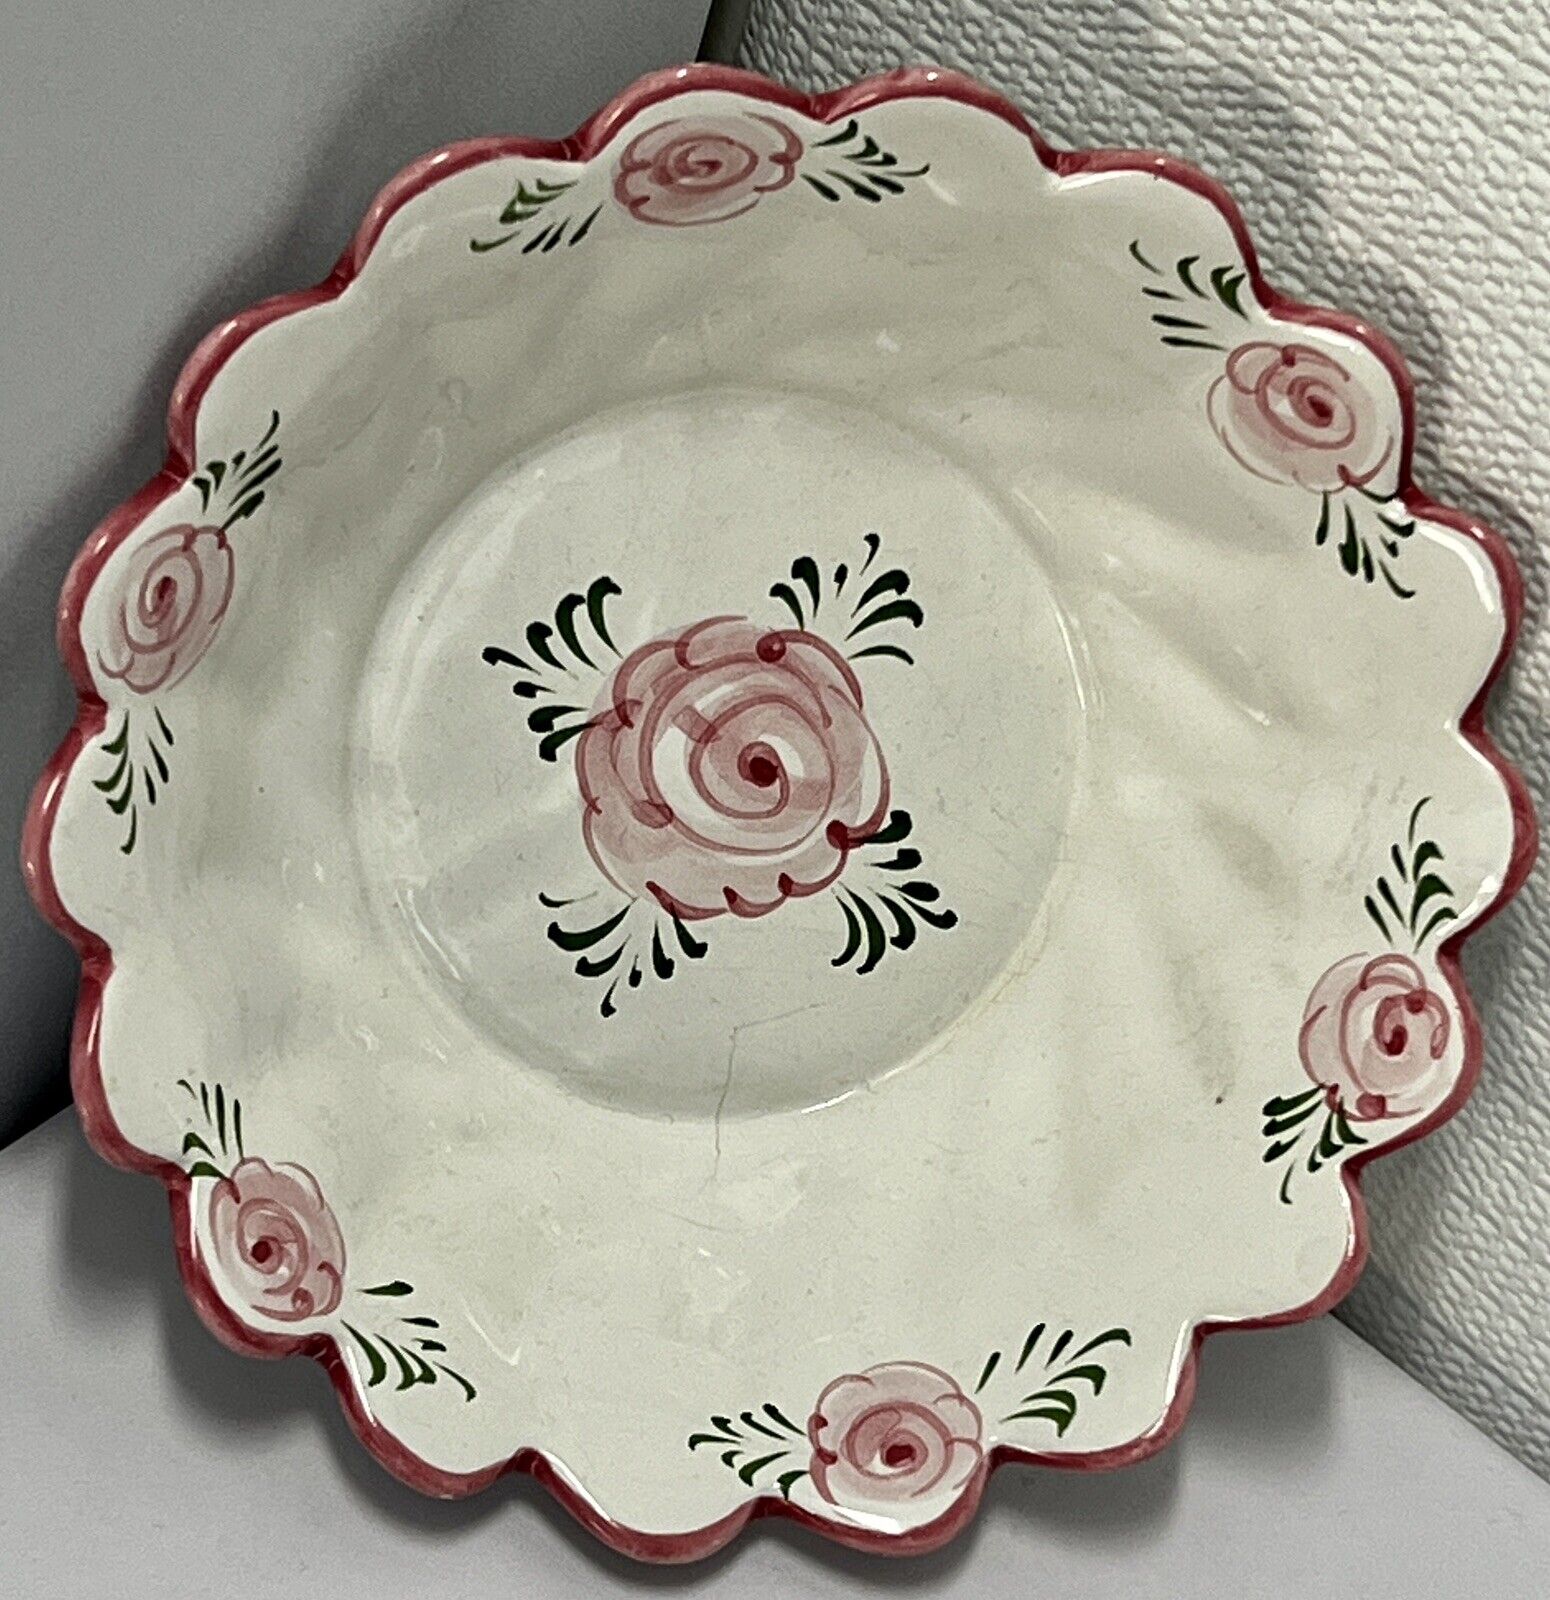 Hand Painted Vestal Pink Roses Ceramic Bowl Portugal 6” Excel. Used Condition